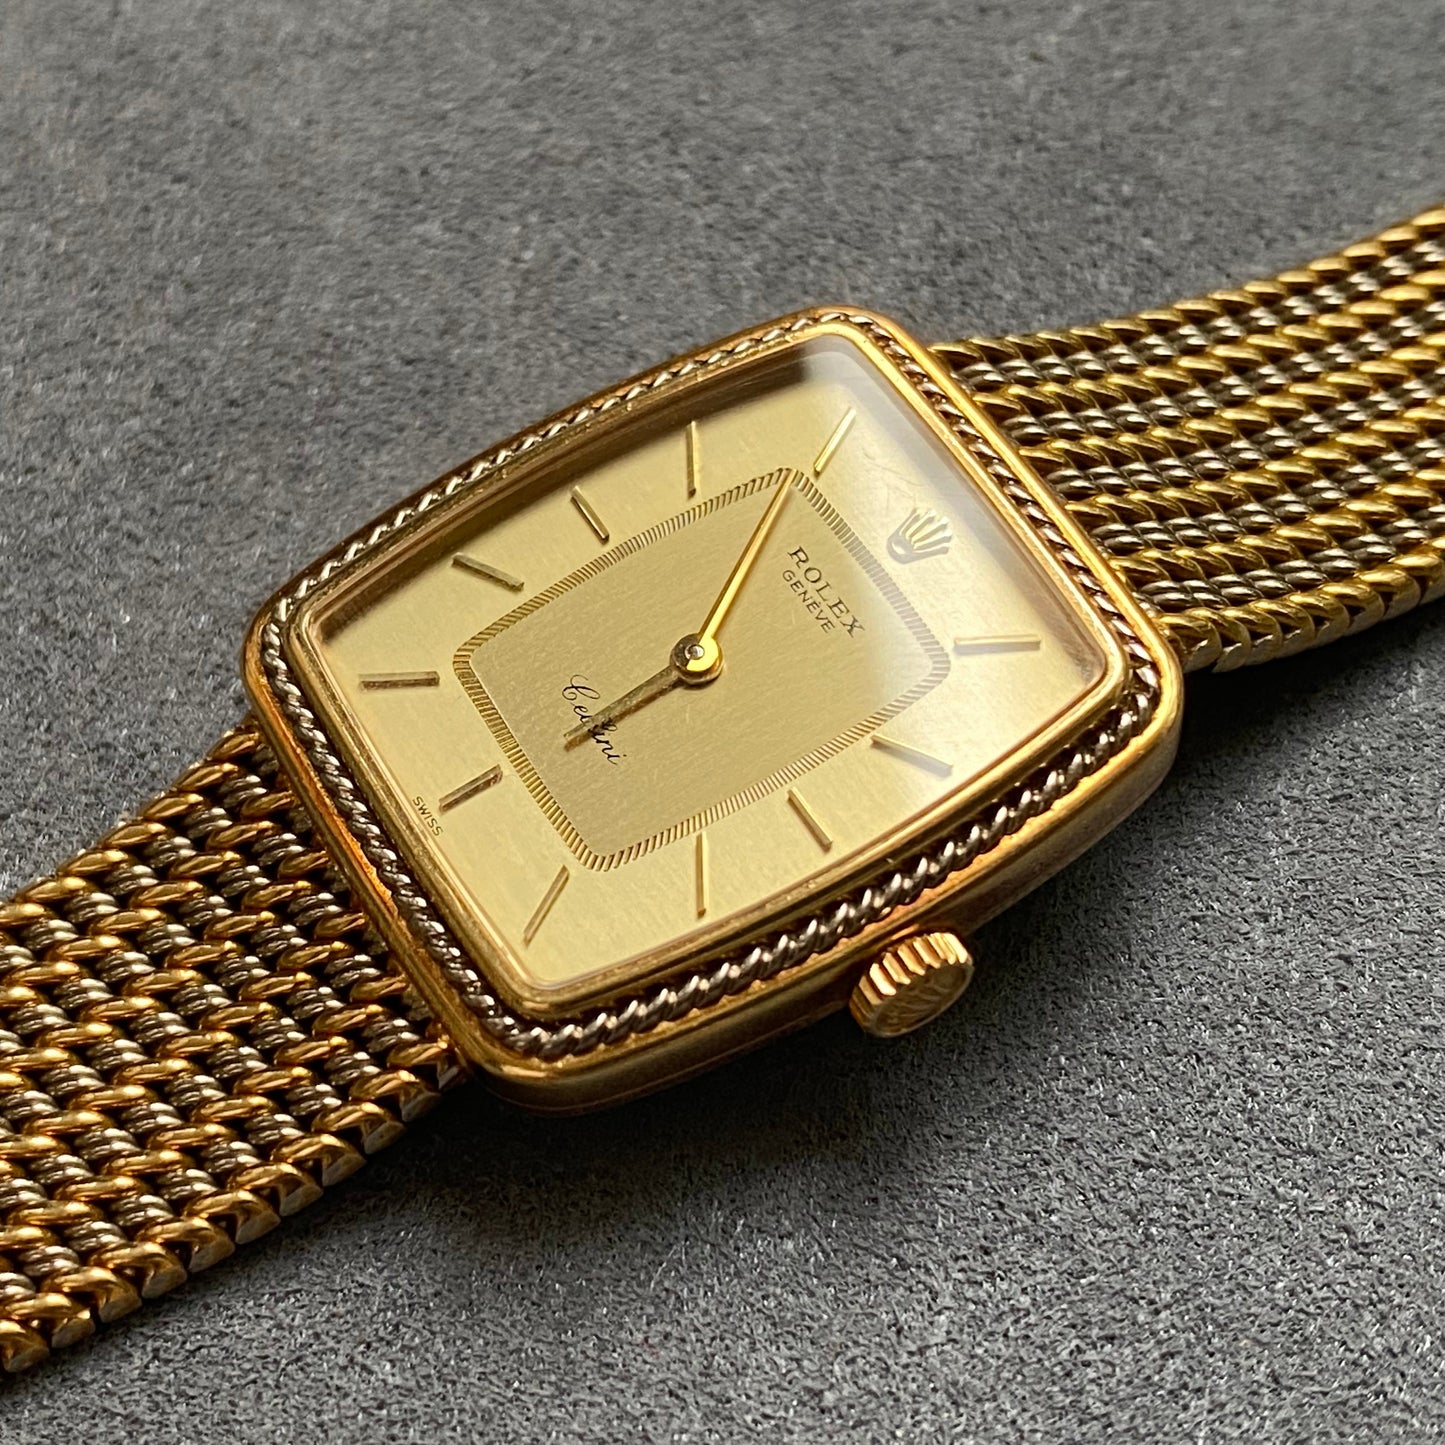 Rolex Cellini 4339 18k Yellow Gold Lady's Watch - PM Vintage Watches - Rolex